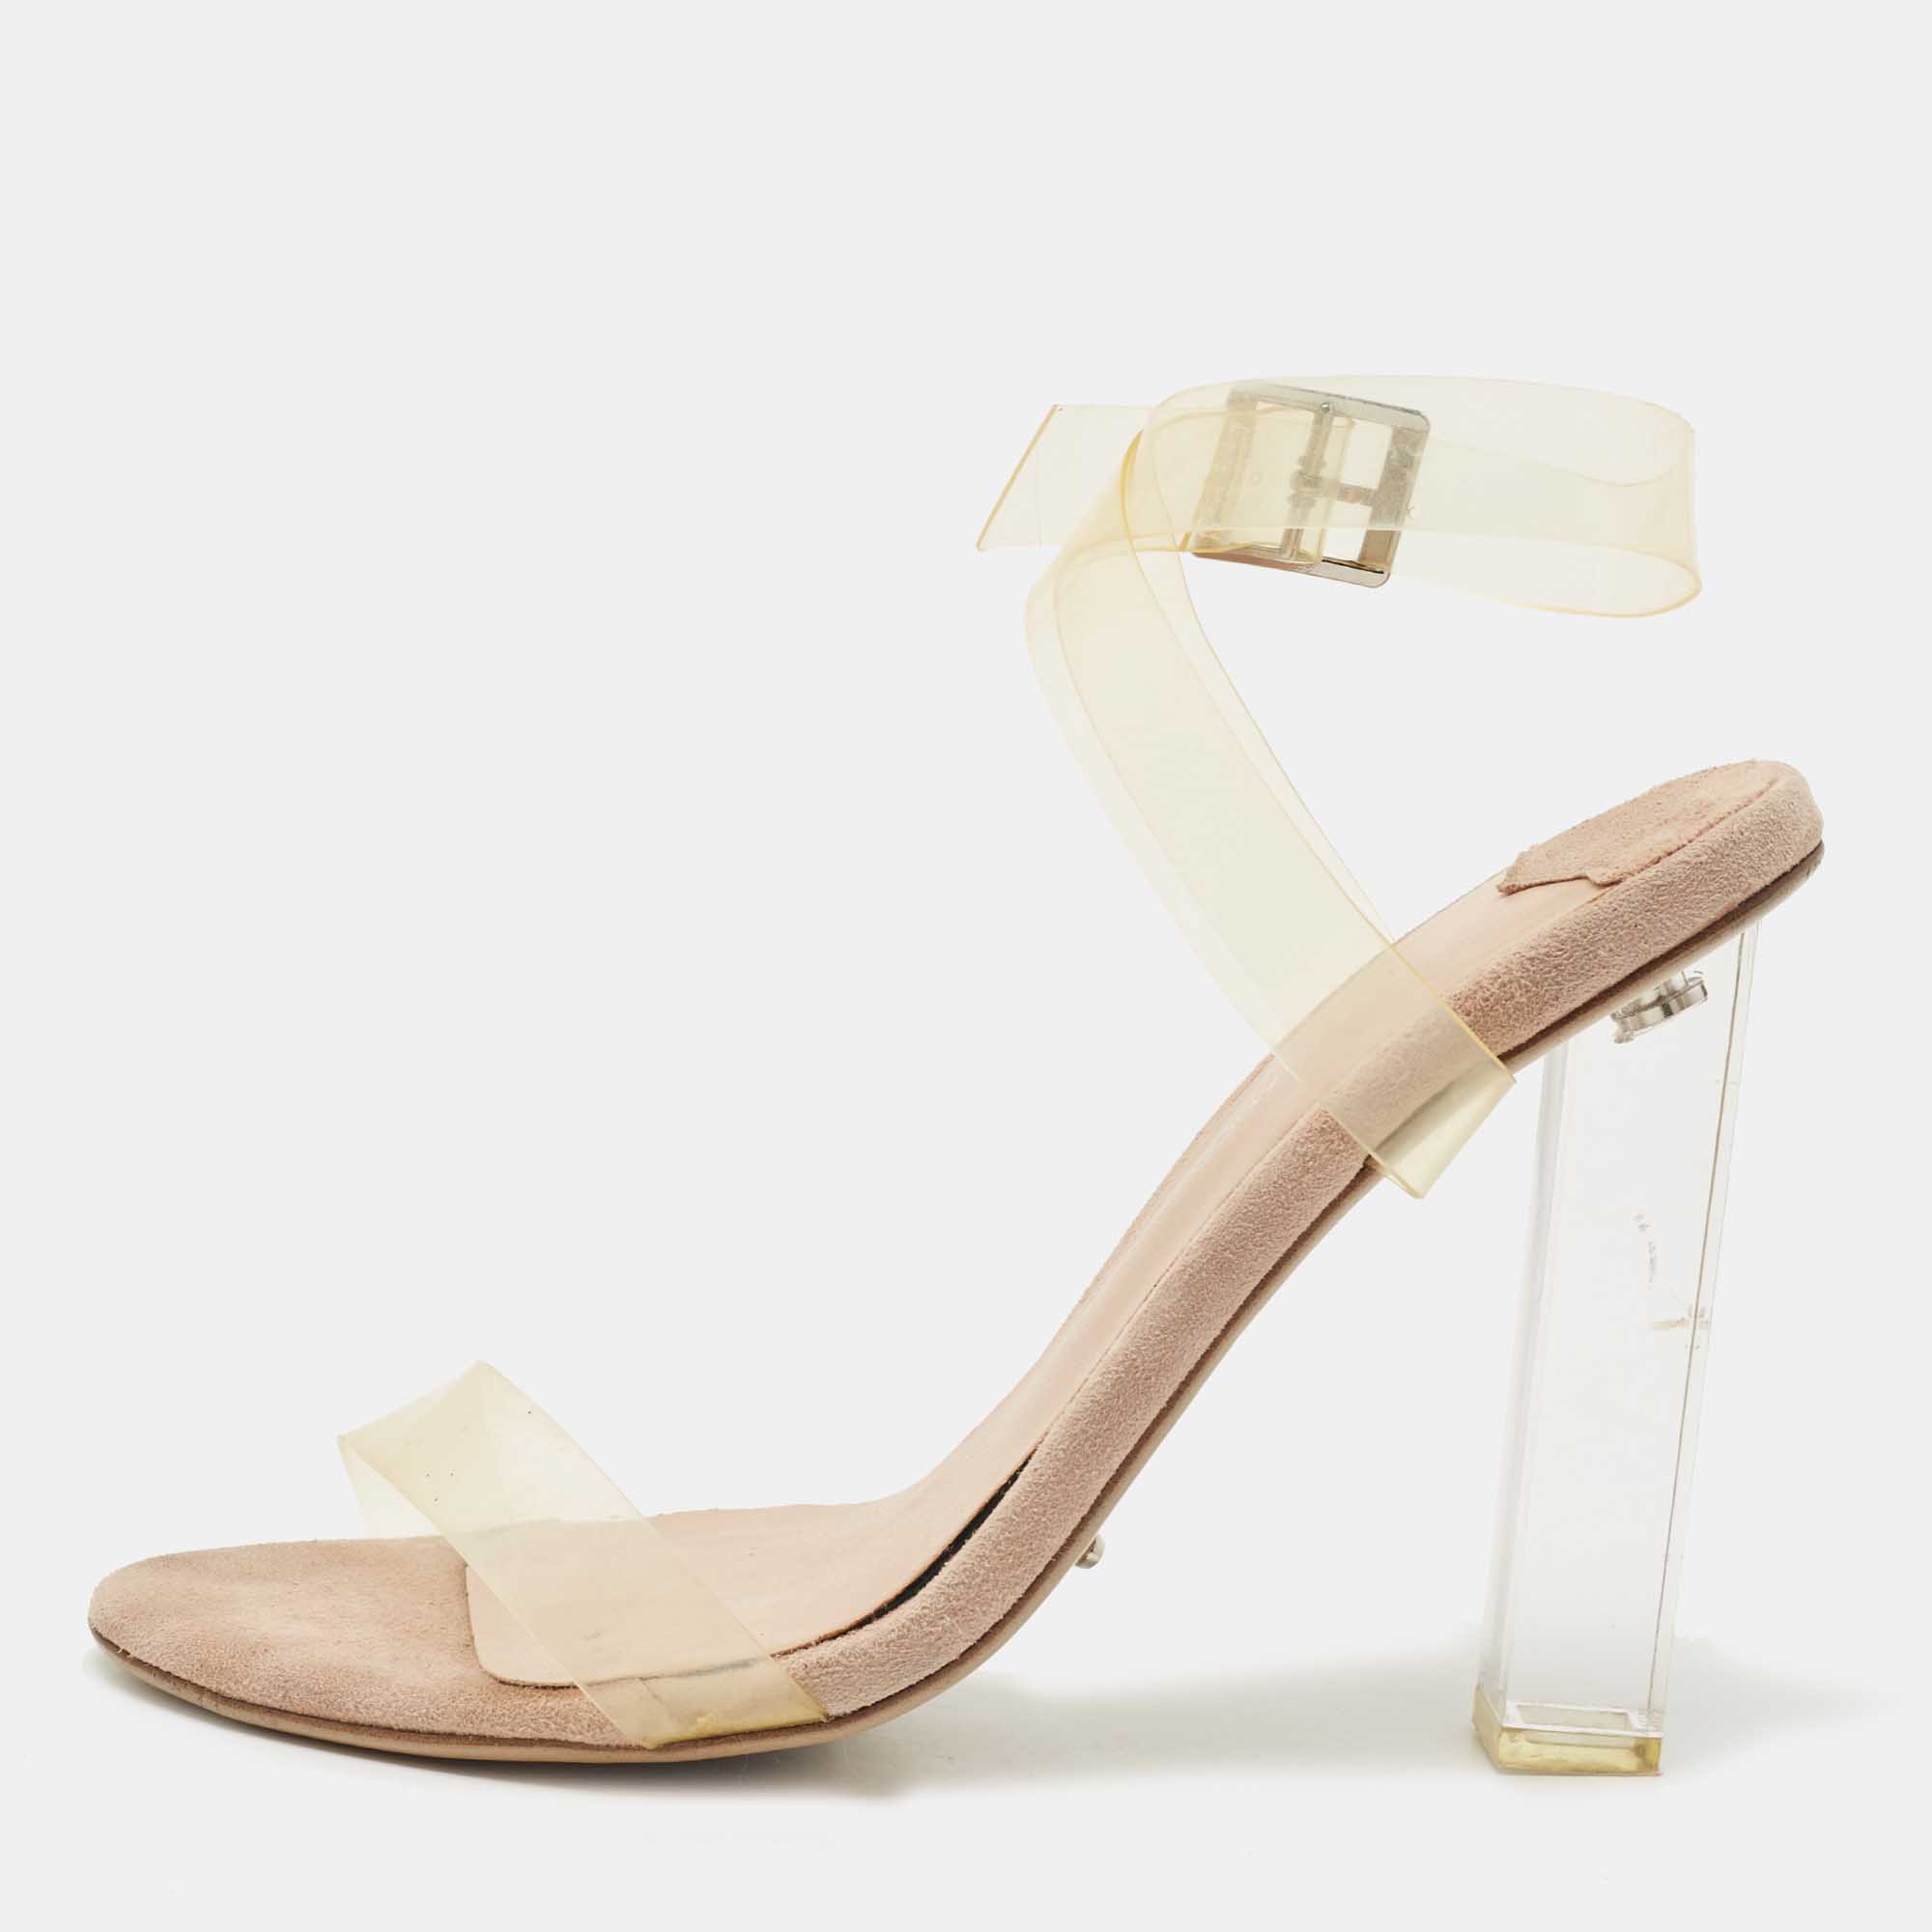 Tony Bianco Beige PVC And Suede Ankle Strap Sandals Size 38